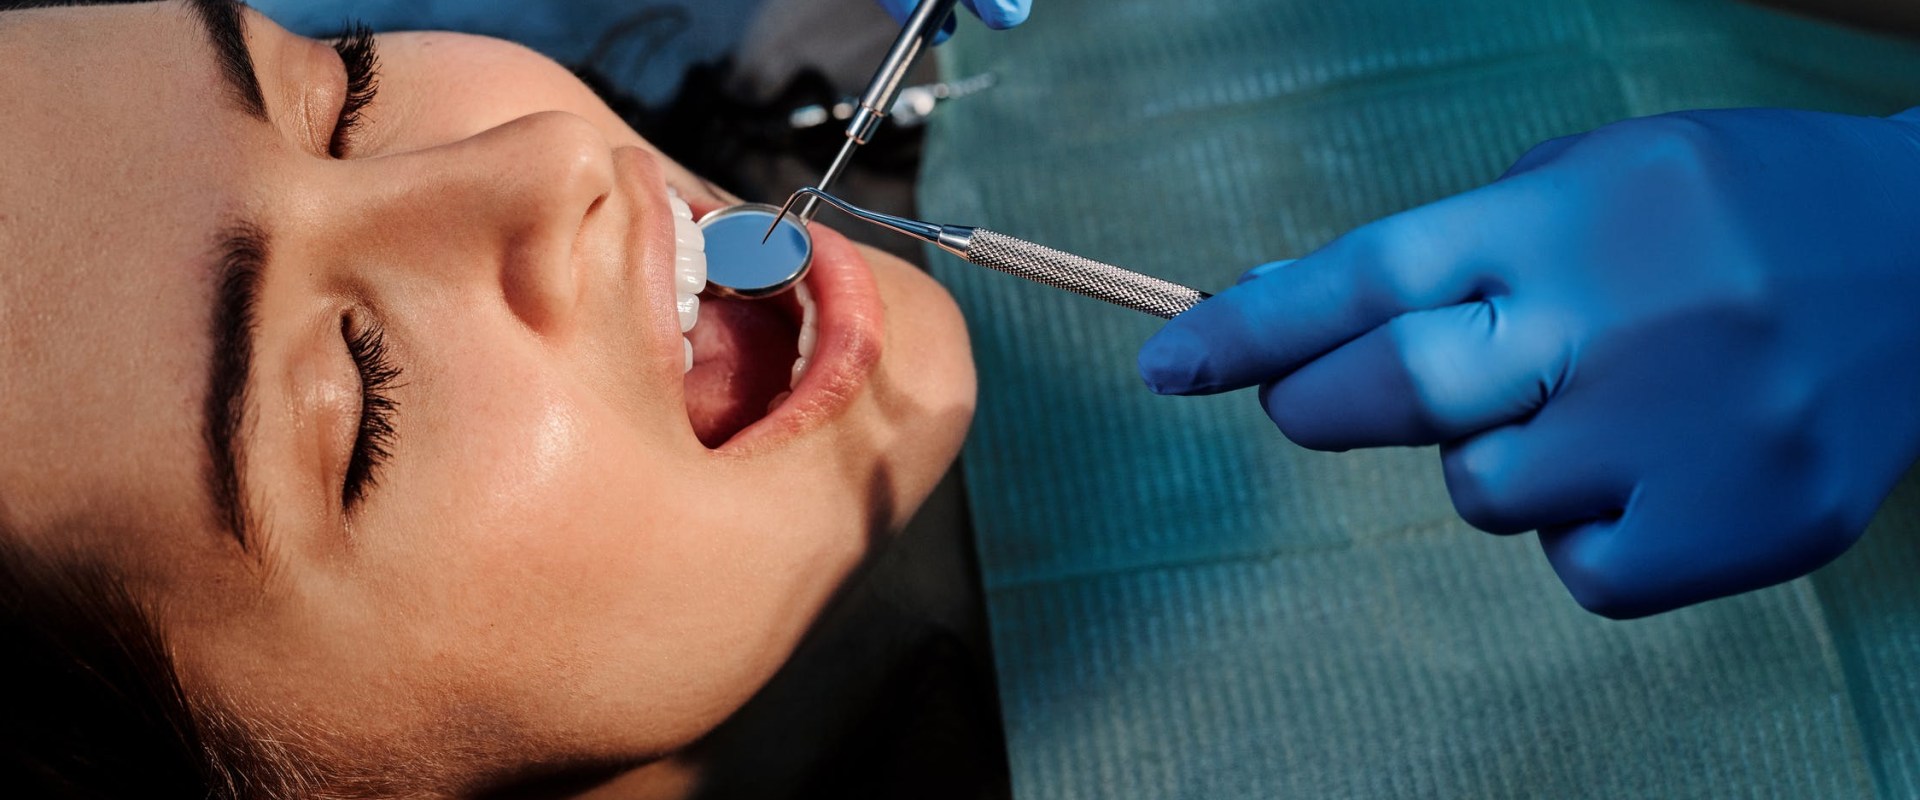 Understanding Onset and Duration of Sedation